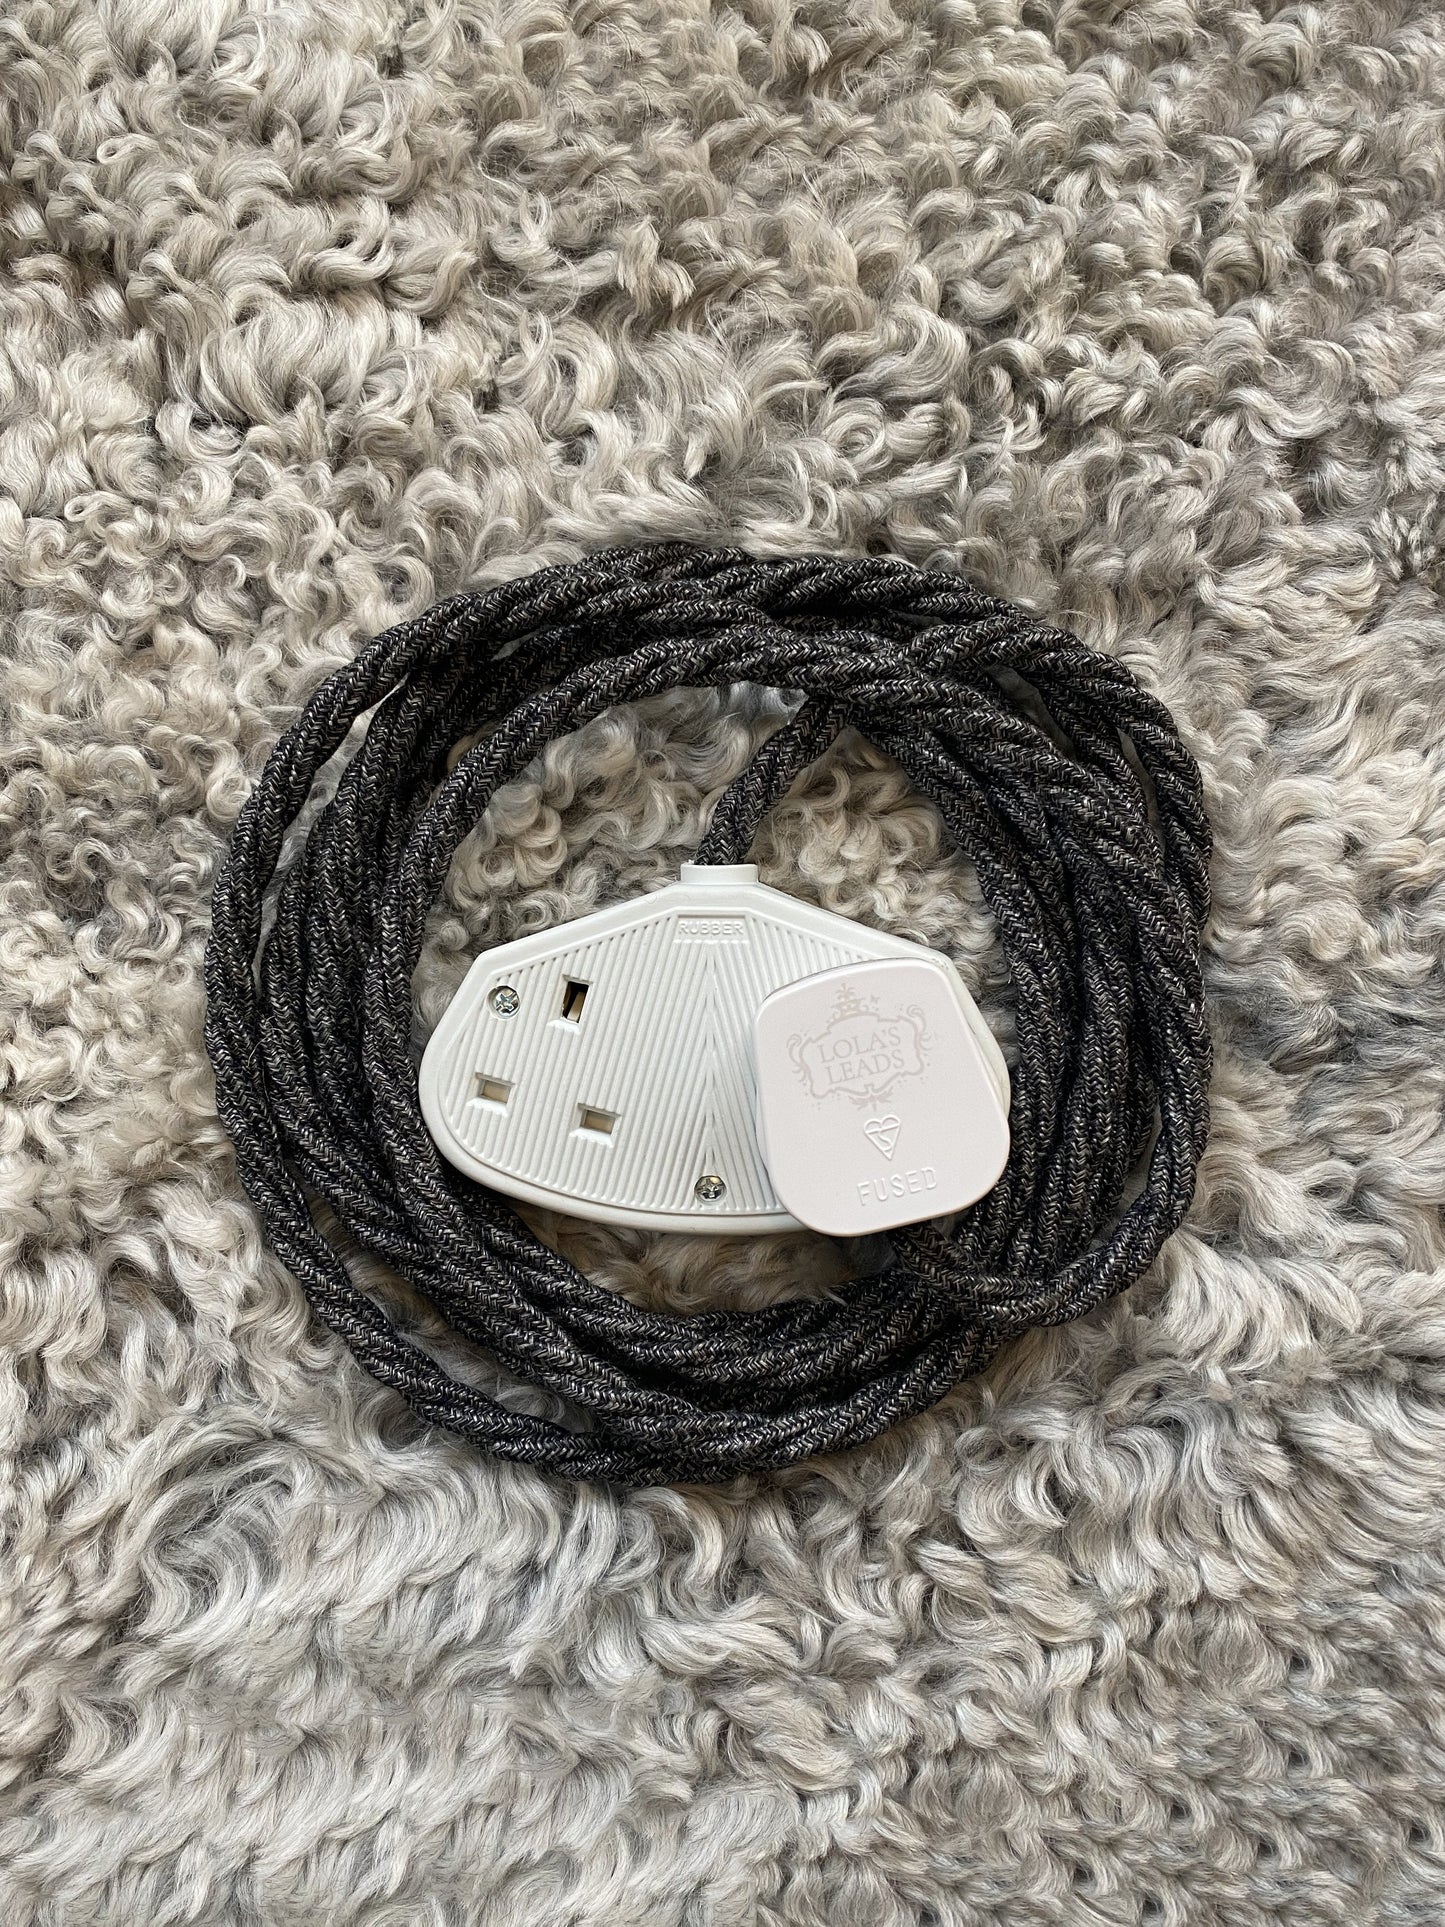 Anthracite Linen - Lola's Leads Fabric Extension Cable